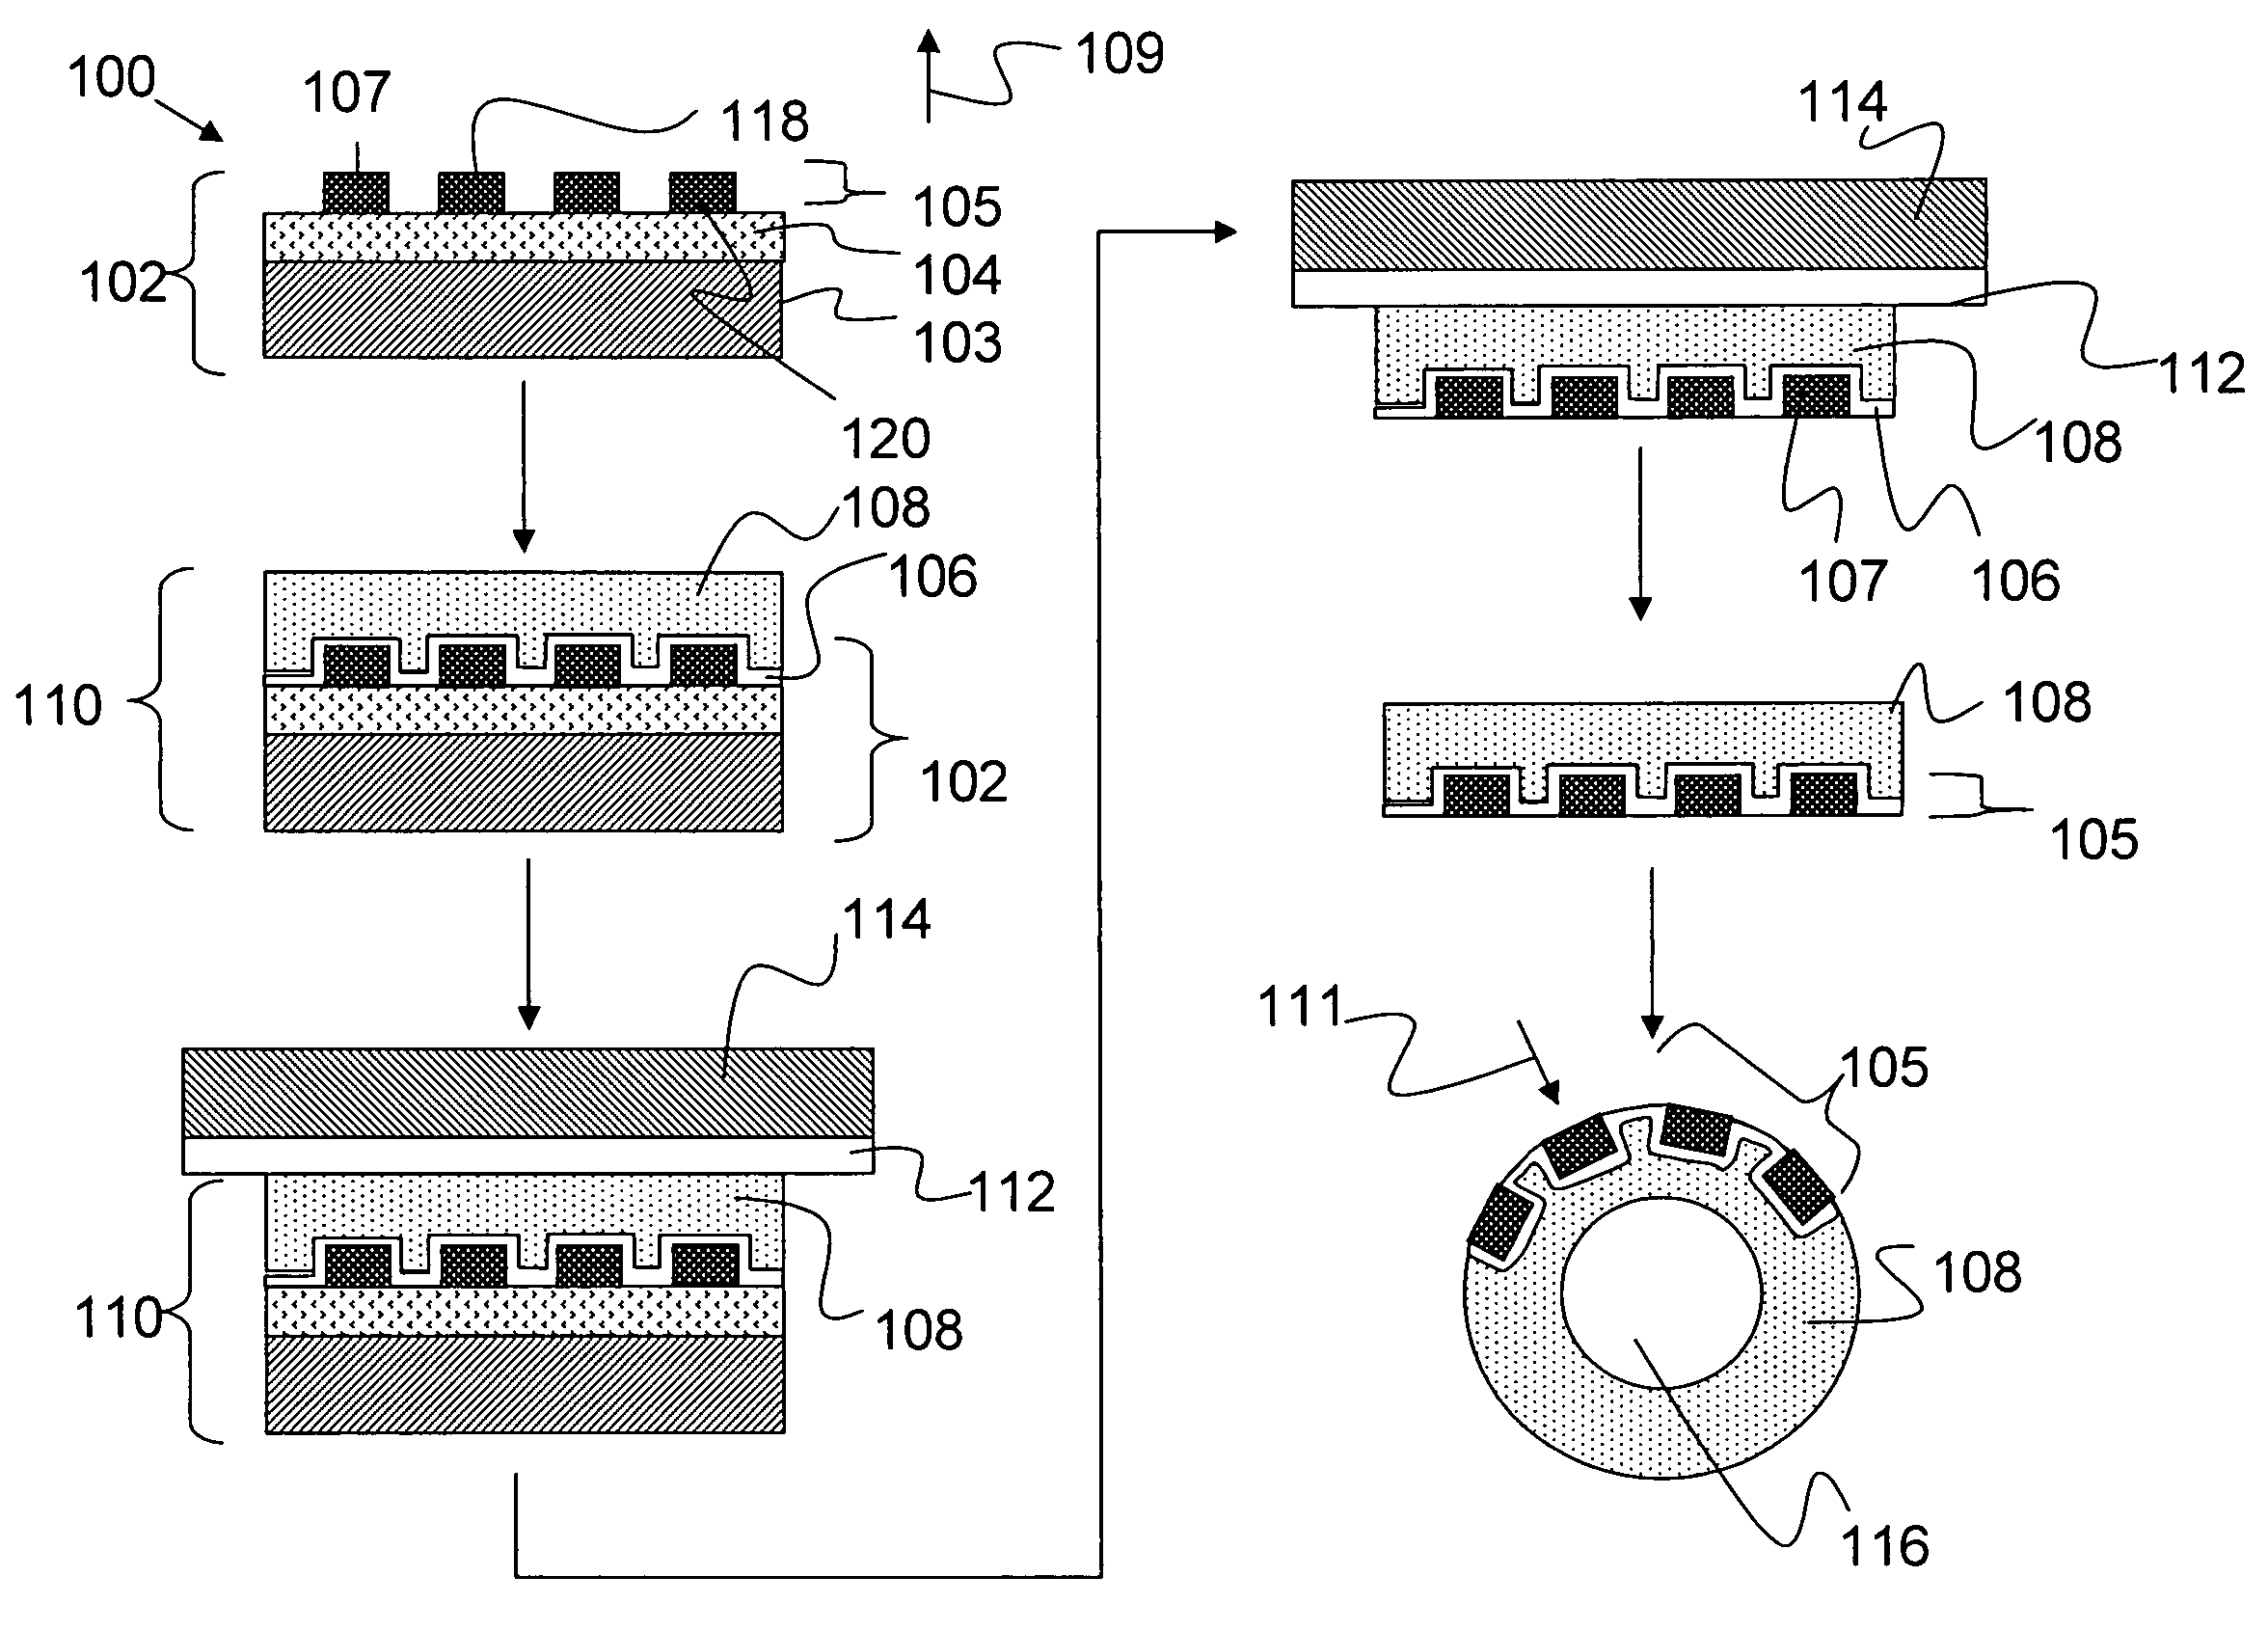 Method for conforming a micro-electronic array to arbitrary shapes